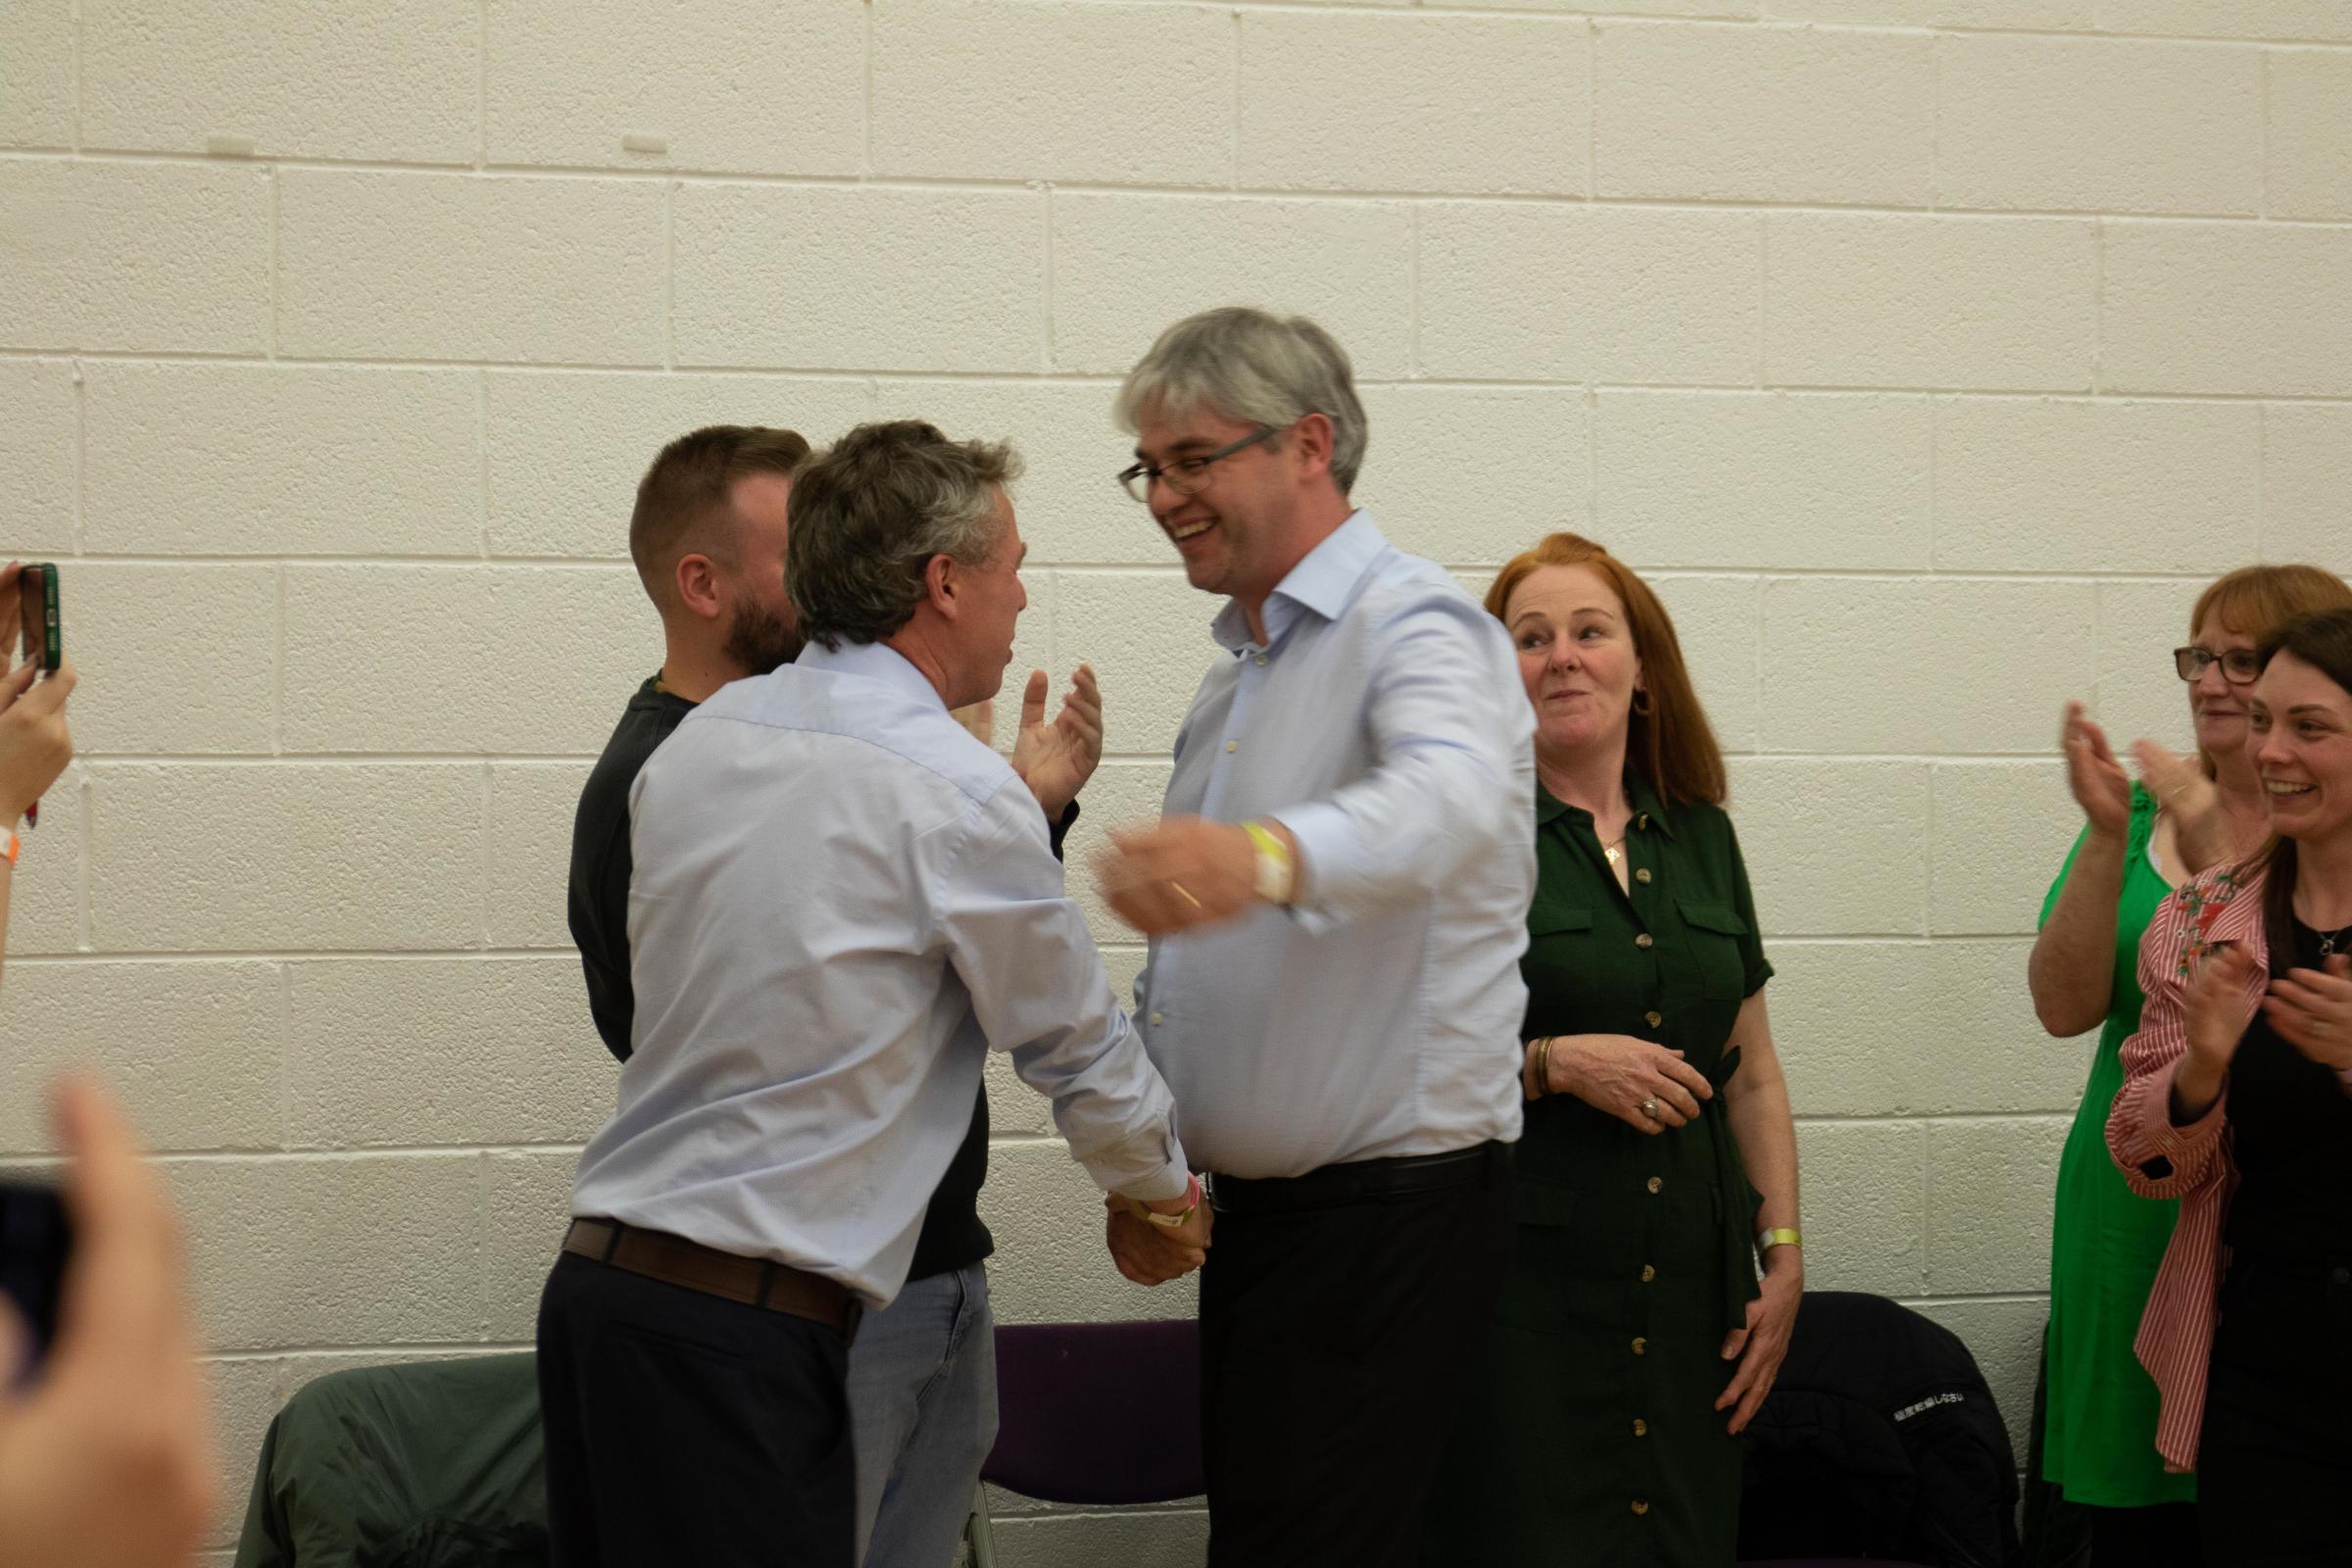 Brothers in arms. Anthony Feely, who was re-elected in Erne West congratulates his brother, John Feely following his election in Erne North.